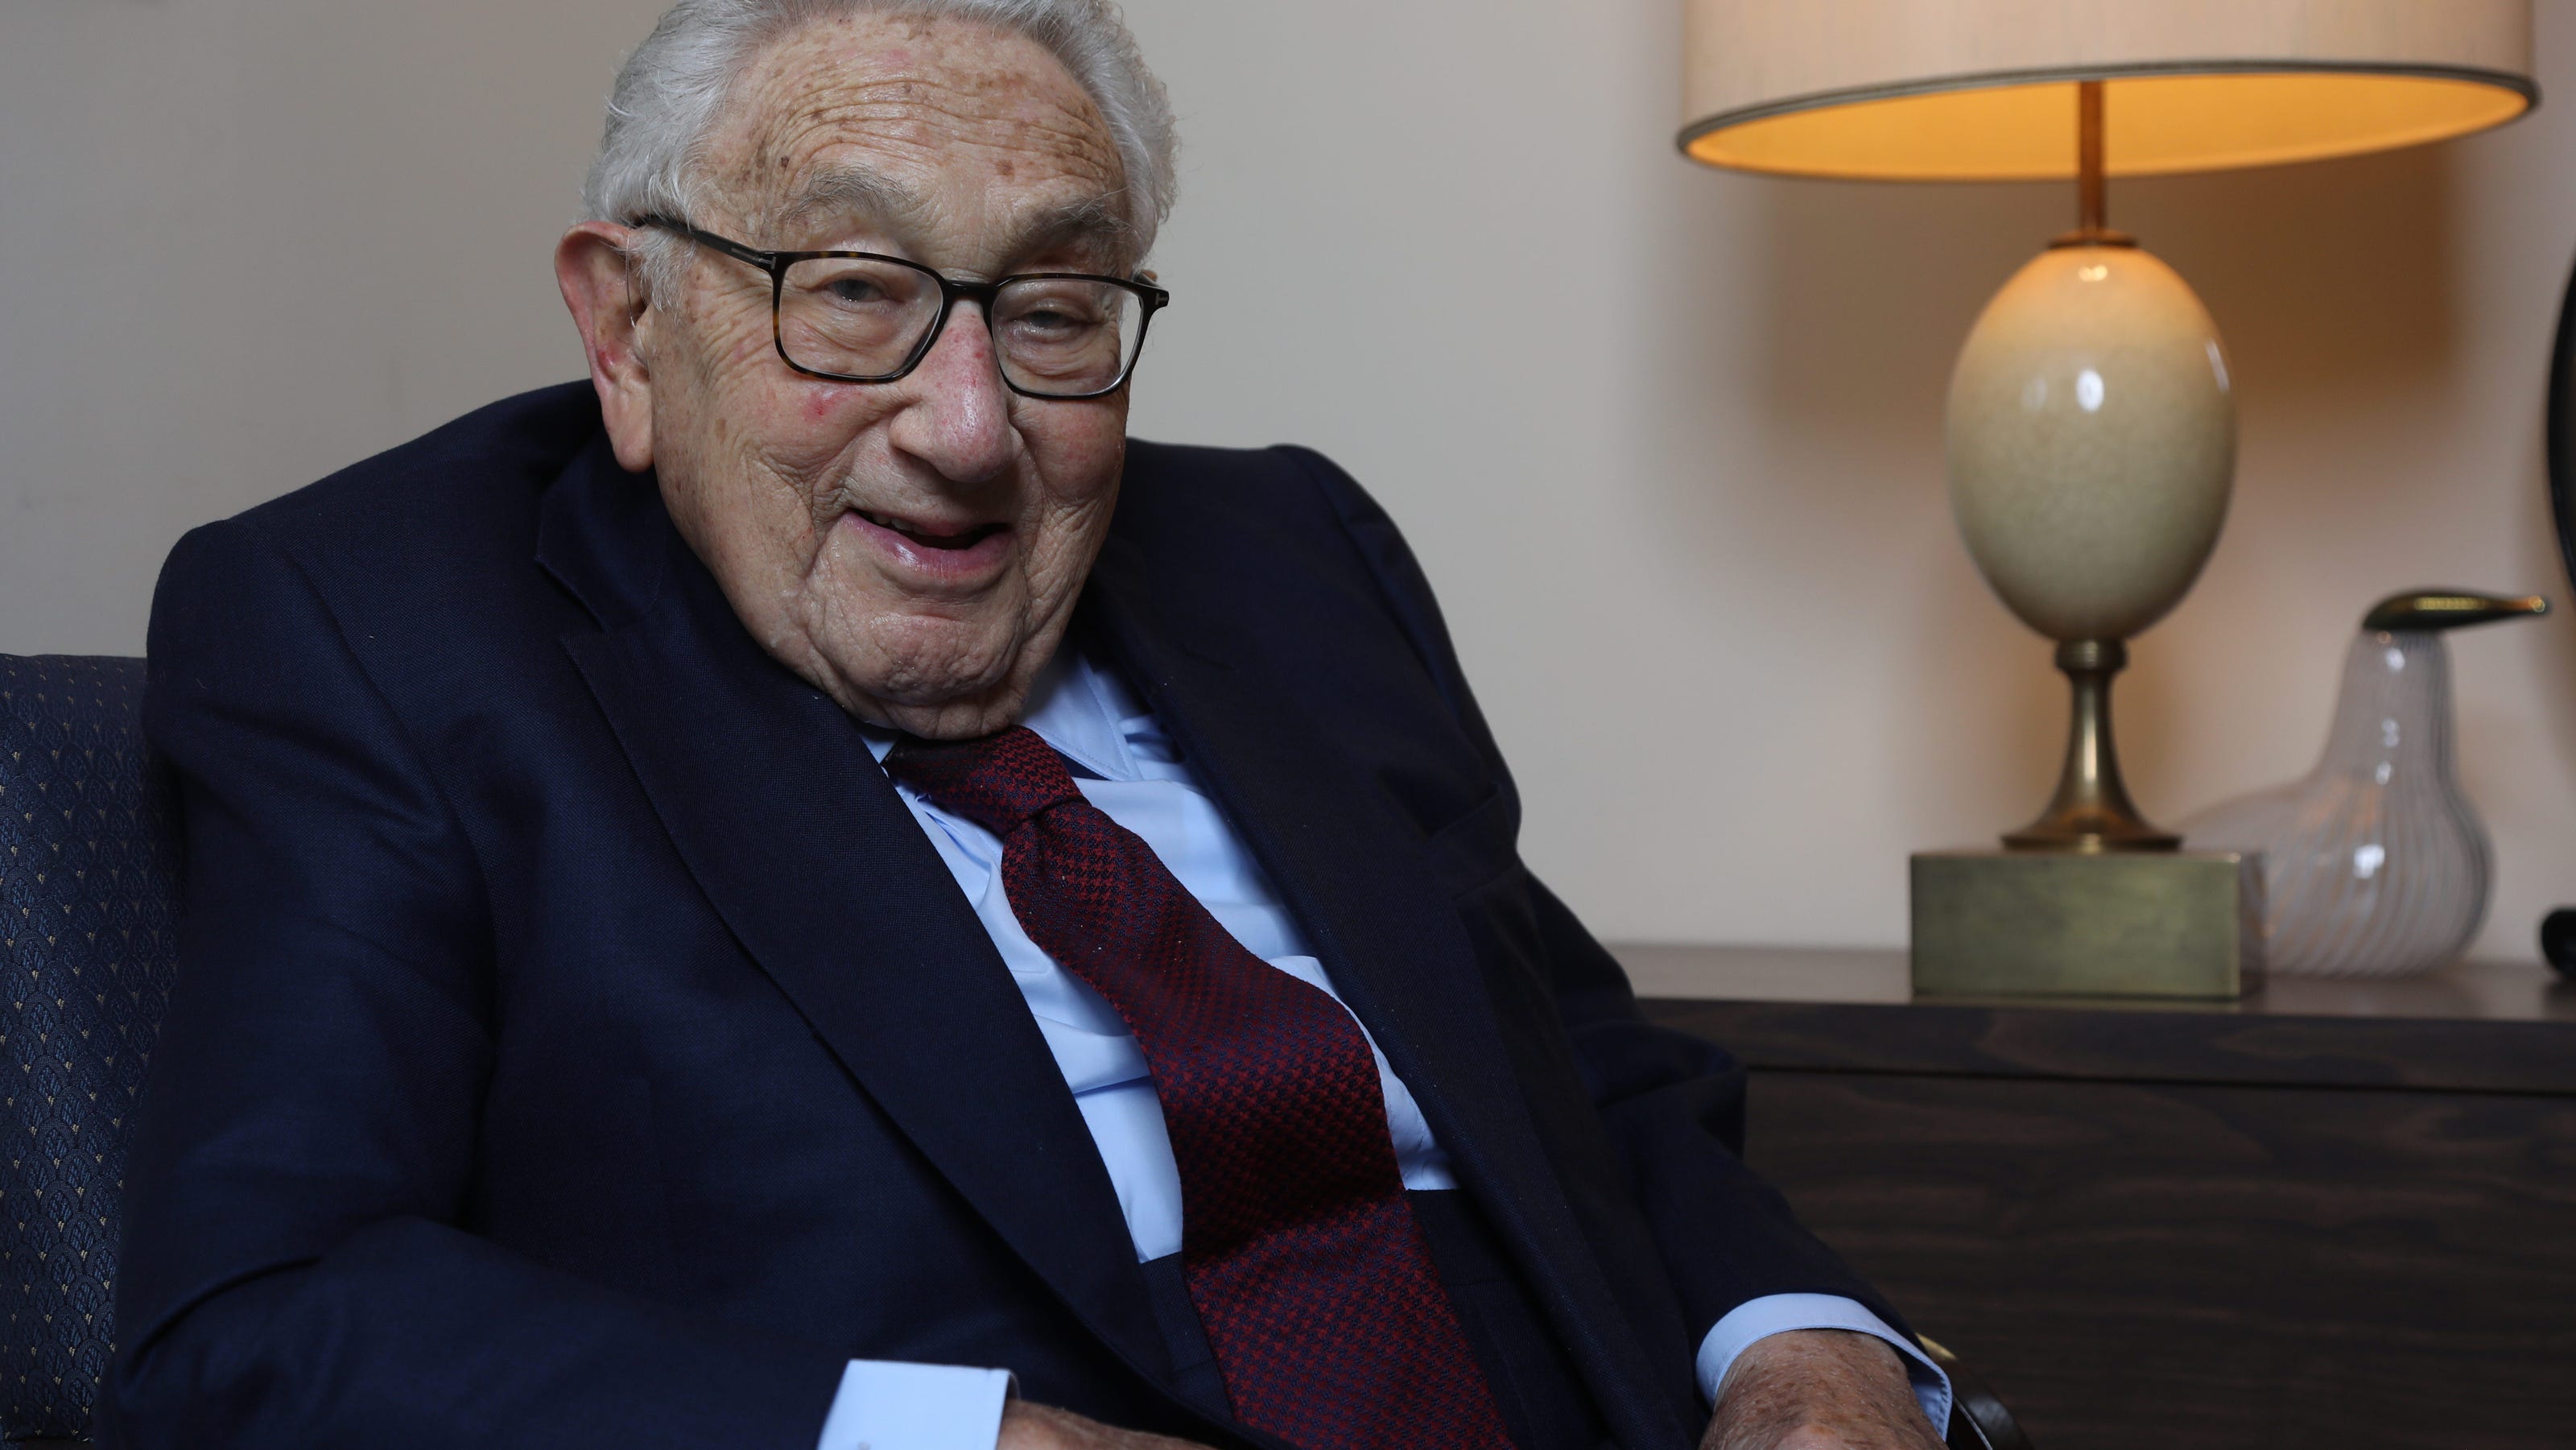 exclusive-kissinger-sees-painful-need-for-better-leaders-will-they-arrive-in-time